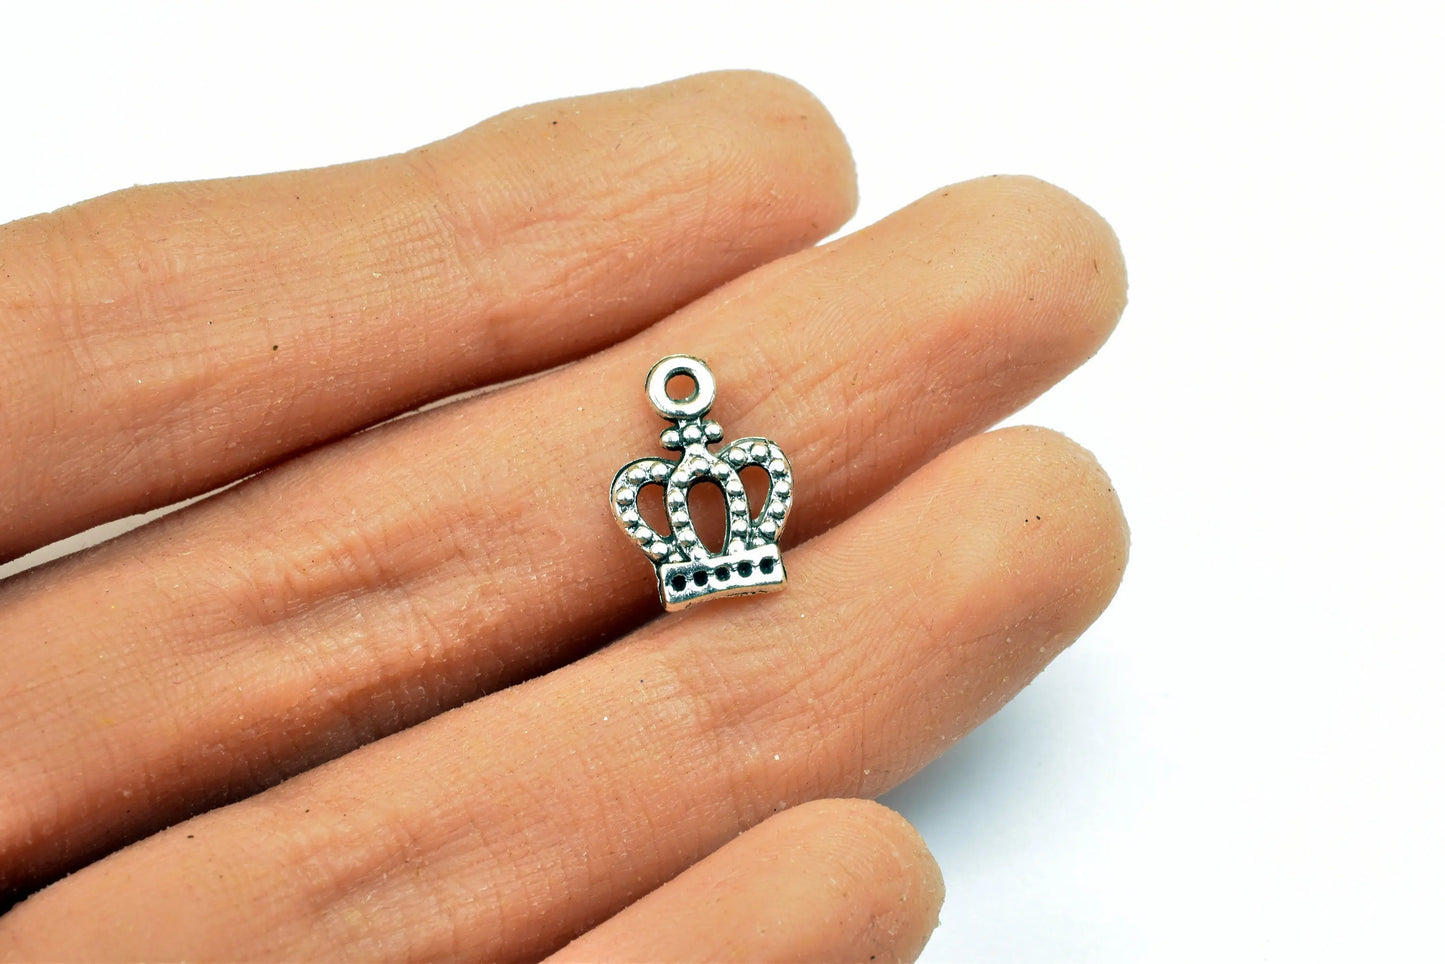 Crown Charm Size 14x10mm Silver Color Princess Charm Pendant Finding For Jewelry Making 42PCs/PK - BeadsFindingDepot